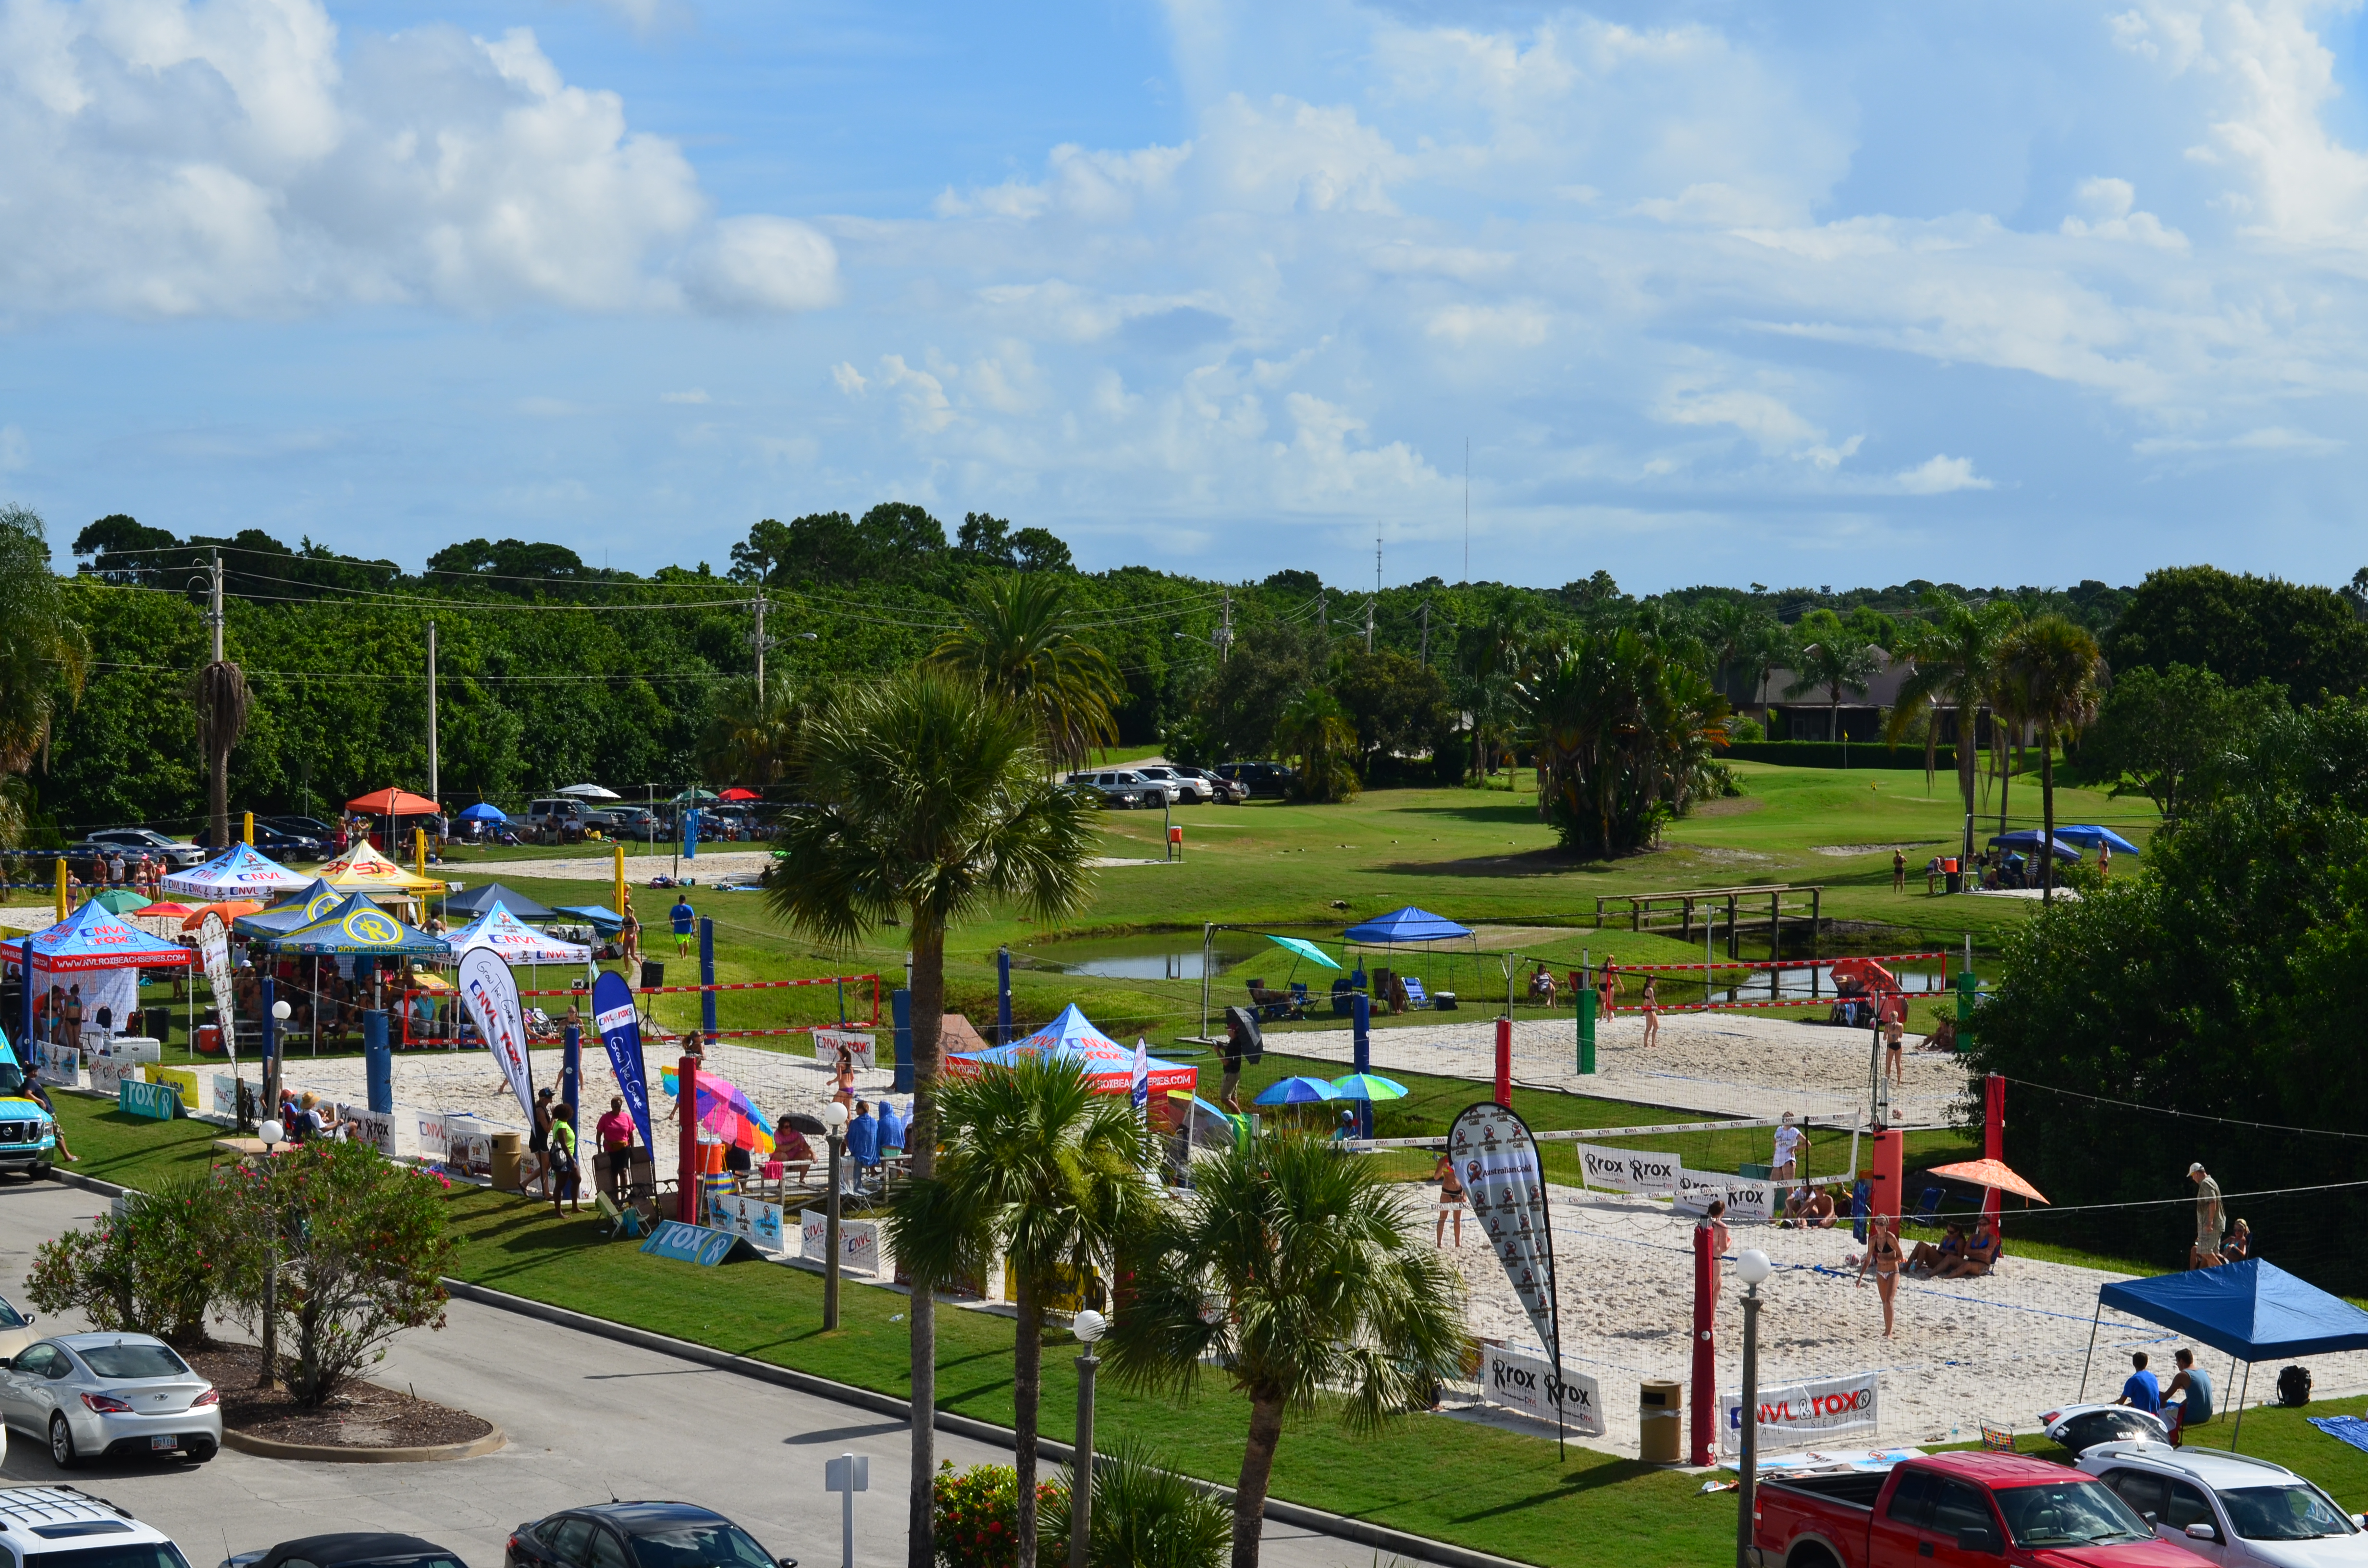 National Volleyball League Hosts Final 2014 Pro Tournament at  NVL Club Med Academy in Port St. Lucie, FL from Oct. 3-4